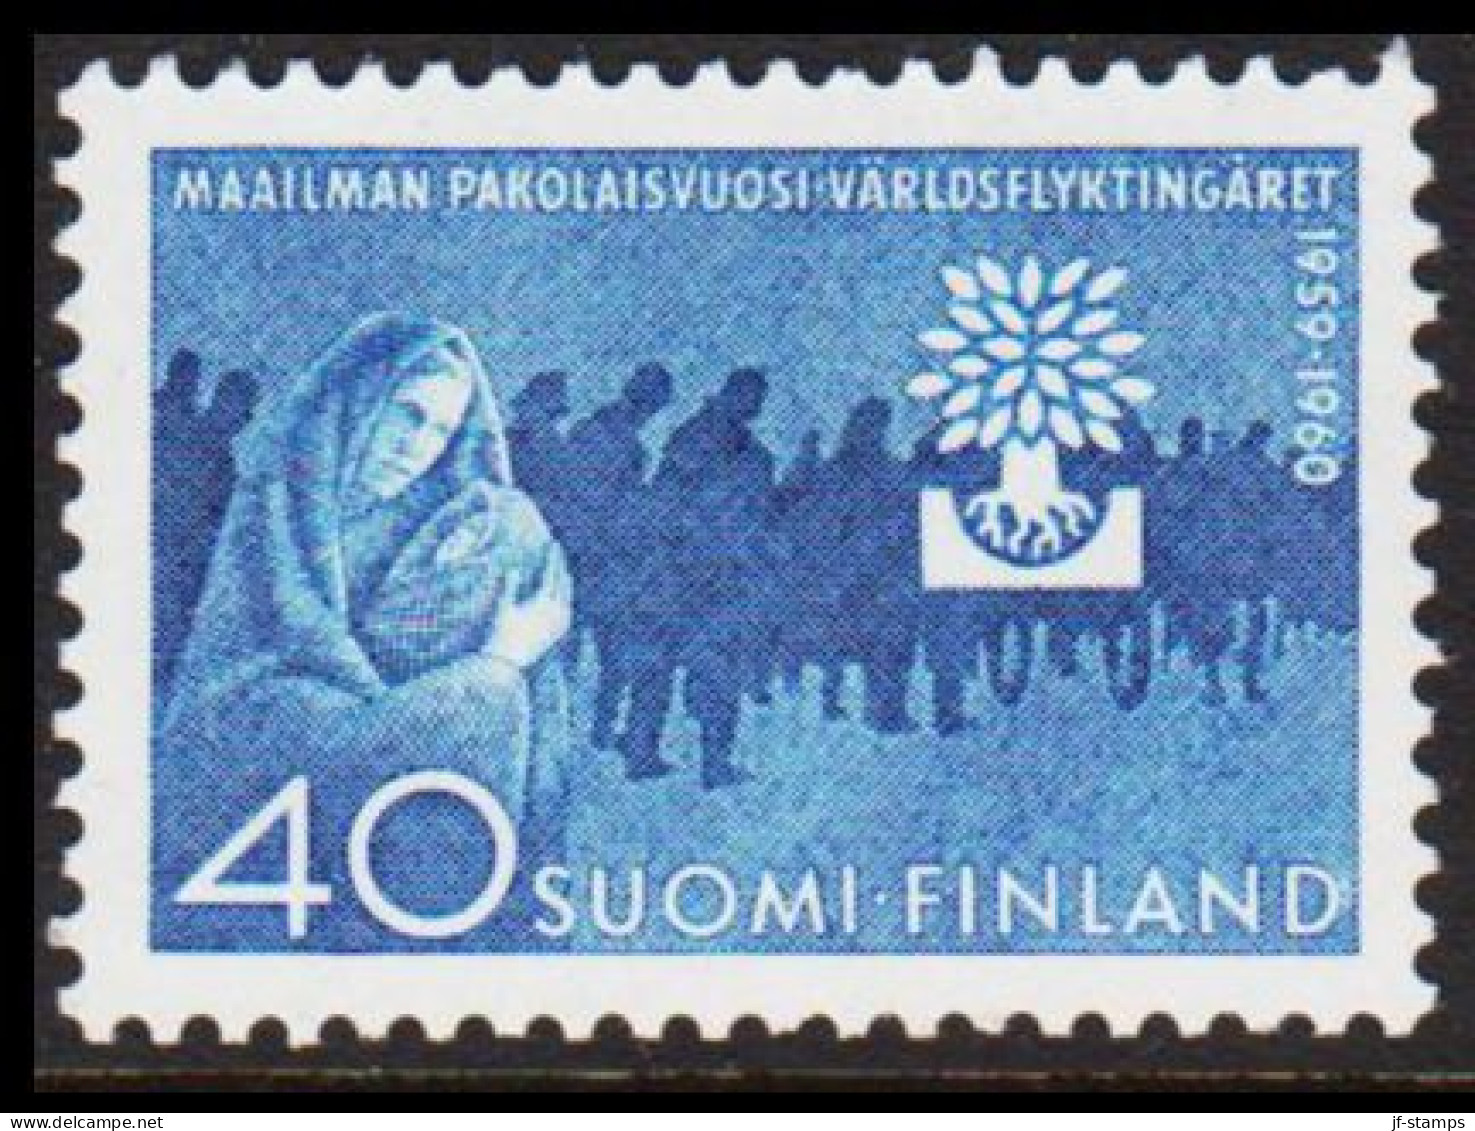 1960. FINLAND. World Refugfee Year 40 M, NEVER HINGED. (Michel 518) - JF540568 - Unused Stamps